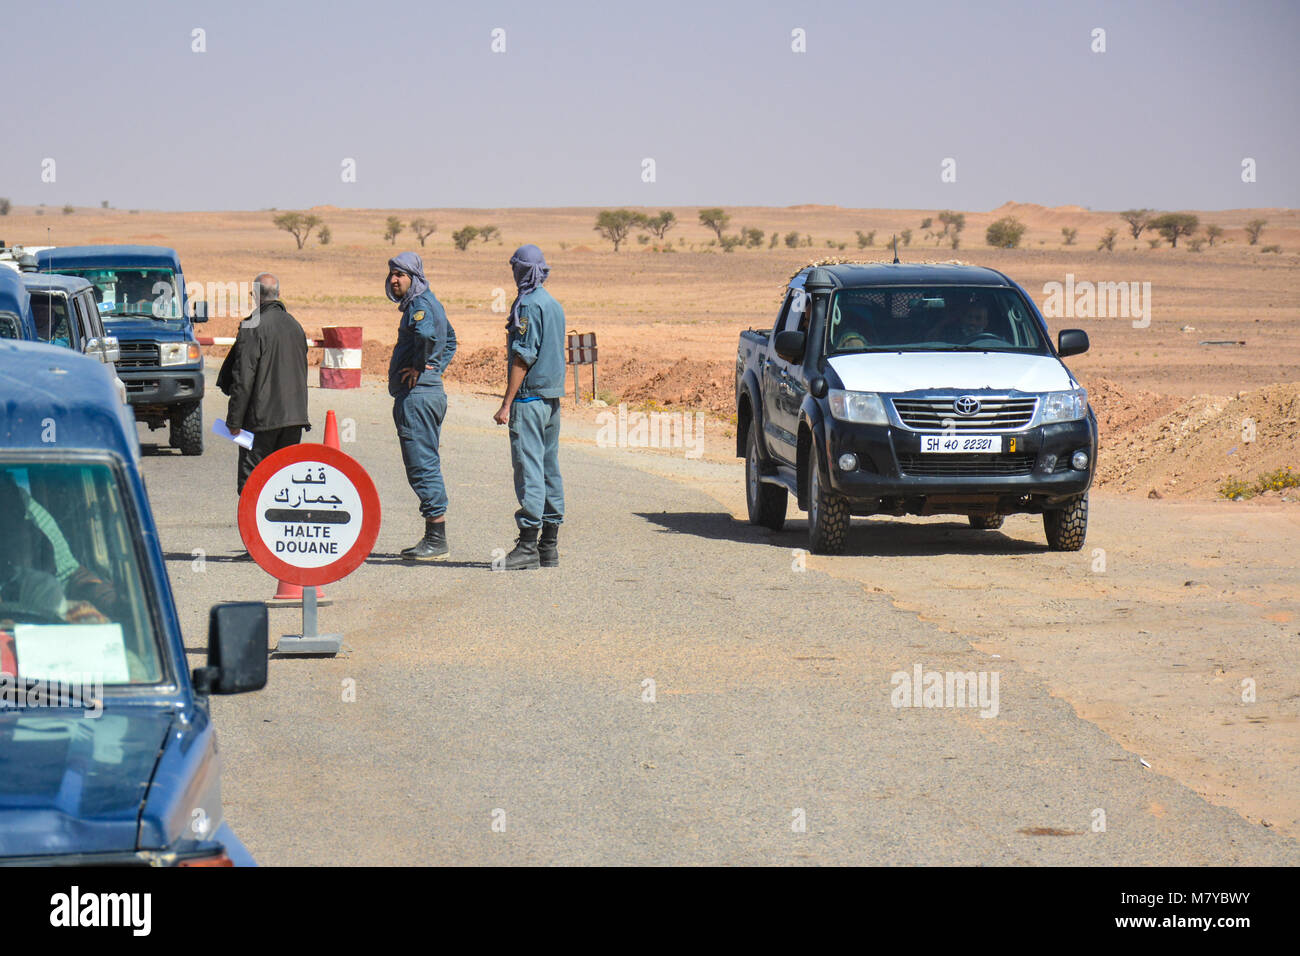 Border crossing in Africa. Stock Photo